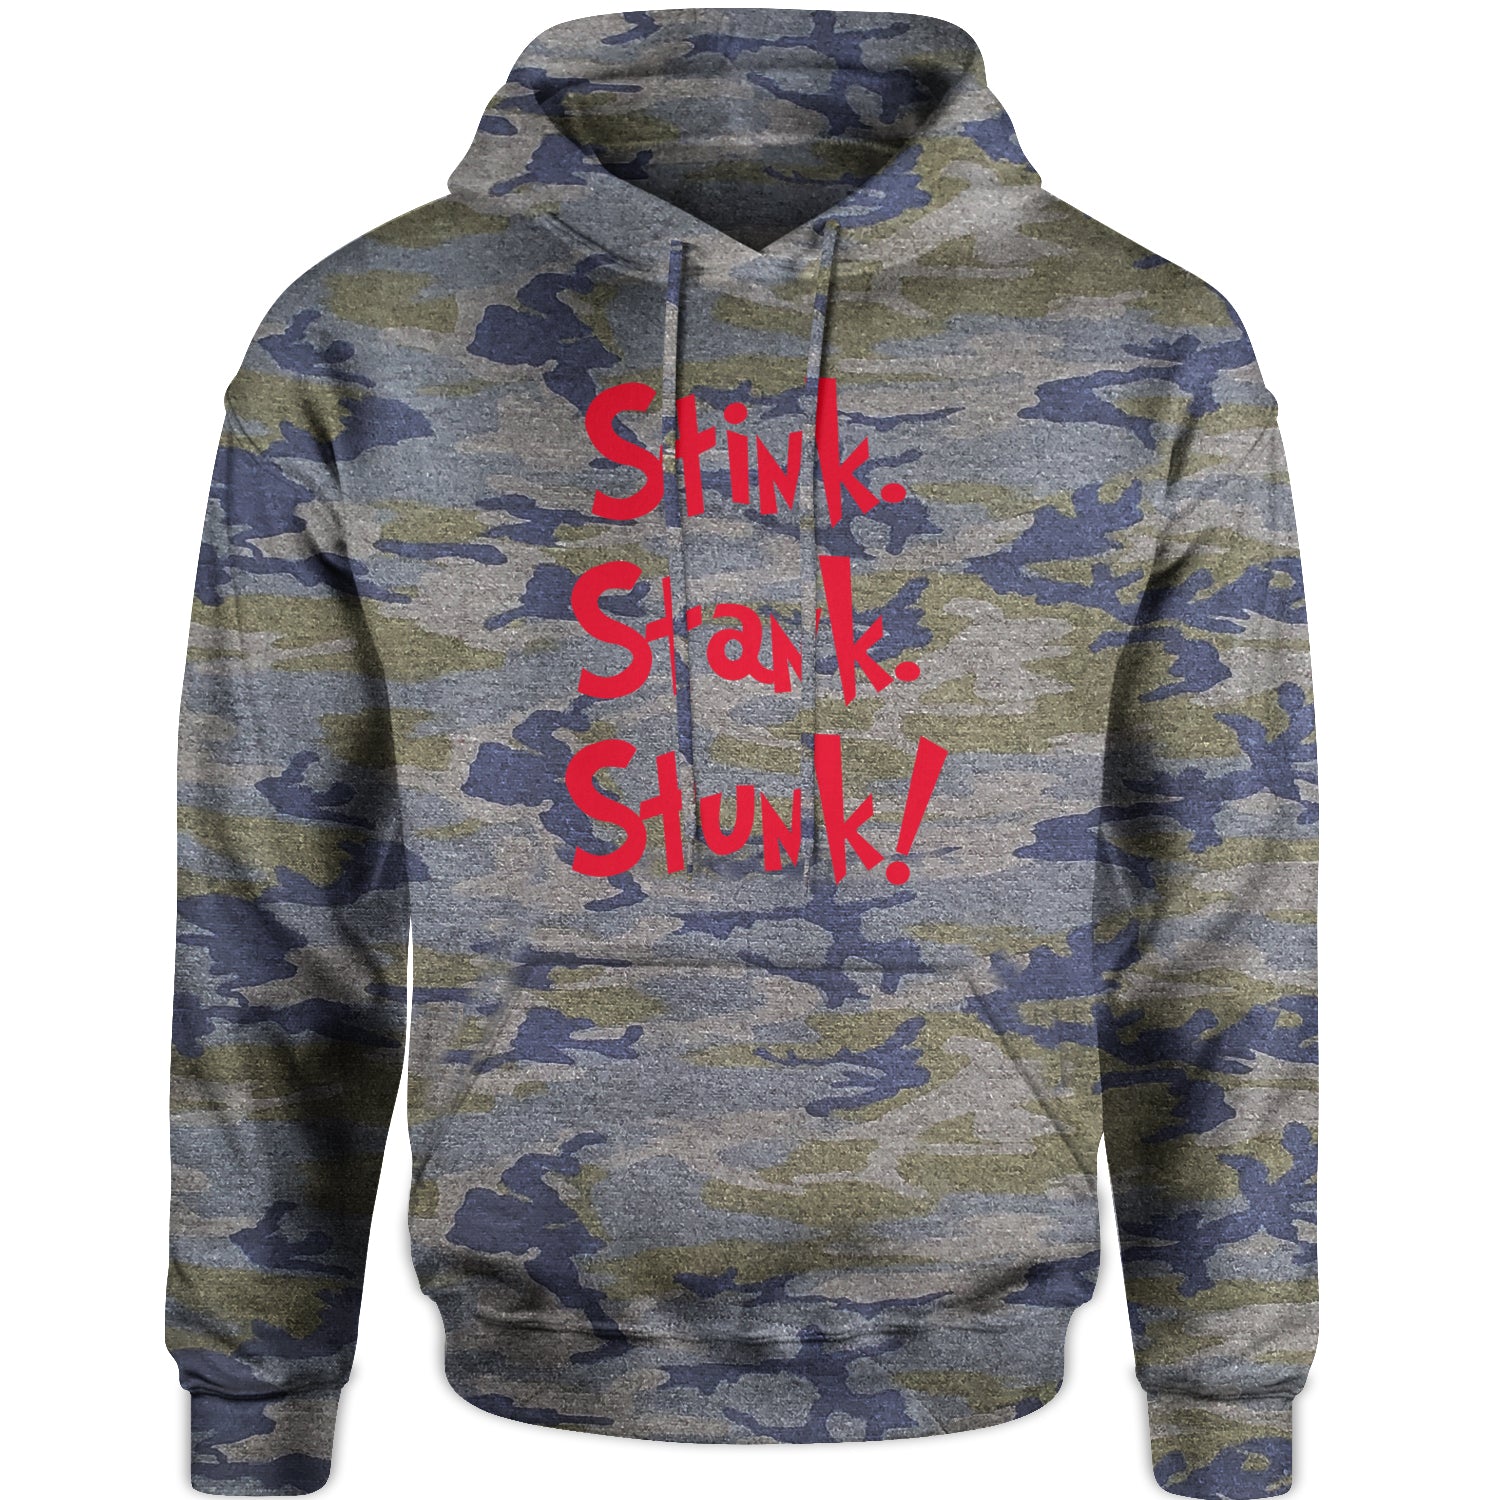 Stink Stank Stunk Grinch Adult Hoodie Sweatshirt christmas, holiday, sweater, ugly, xmas by Expression Tees